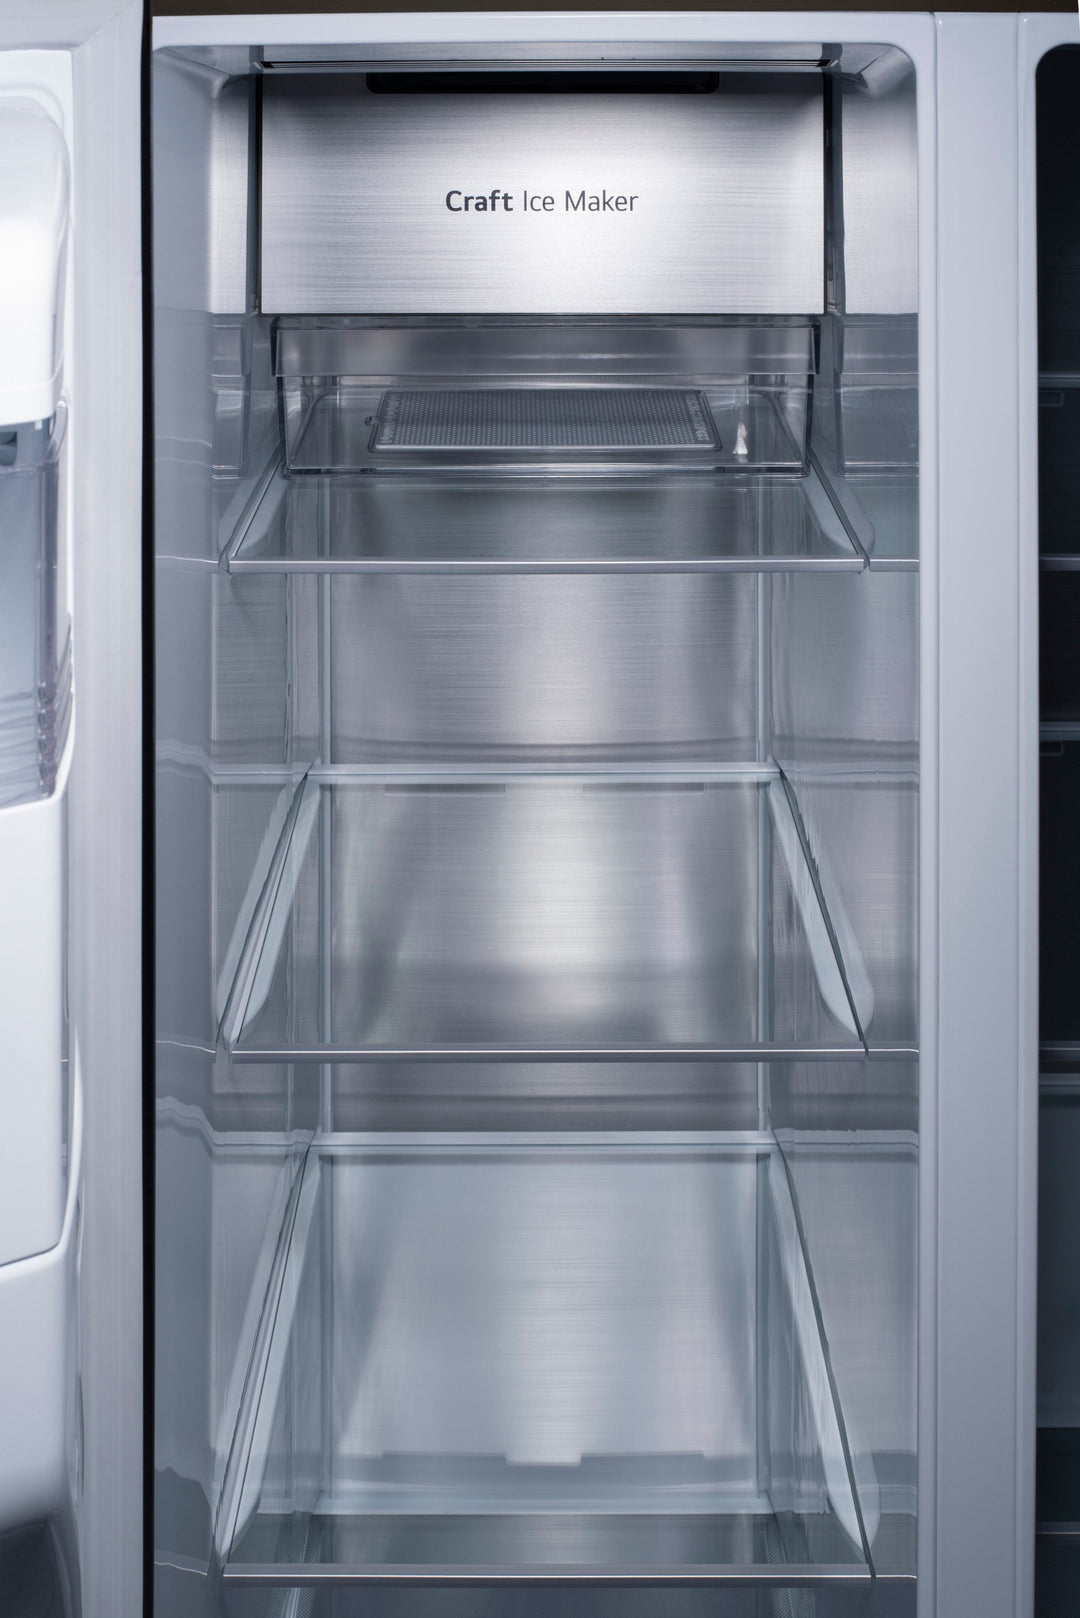 LG - 27 Cu. Ft. Side-by-Side Smart Refrigerator with Craft Ice and InstaView - Stainless steel_2